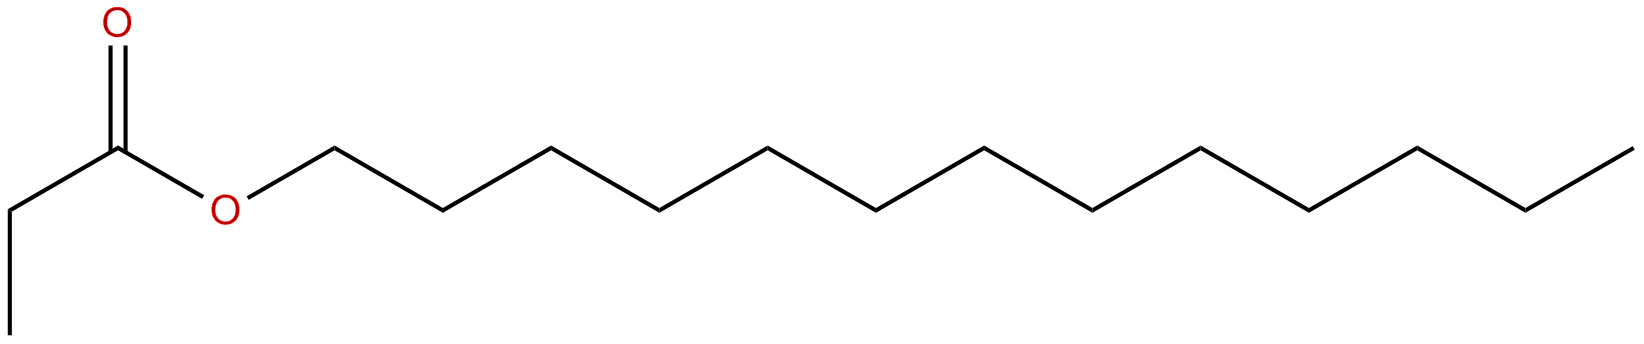 Image of tridecyl propanoate